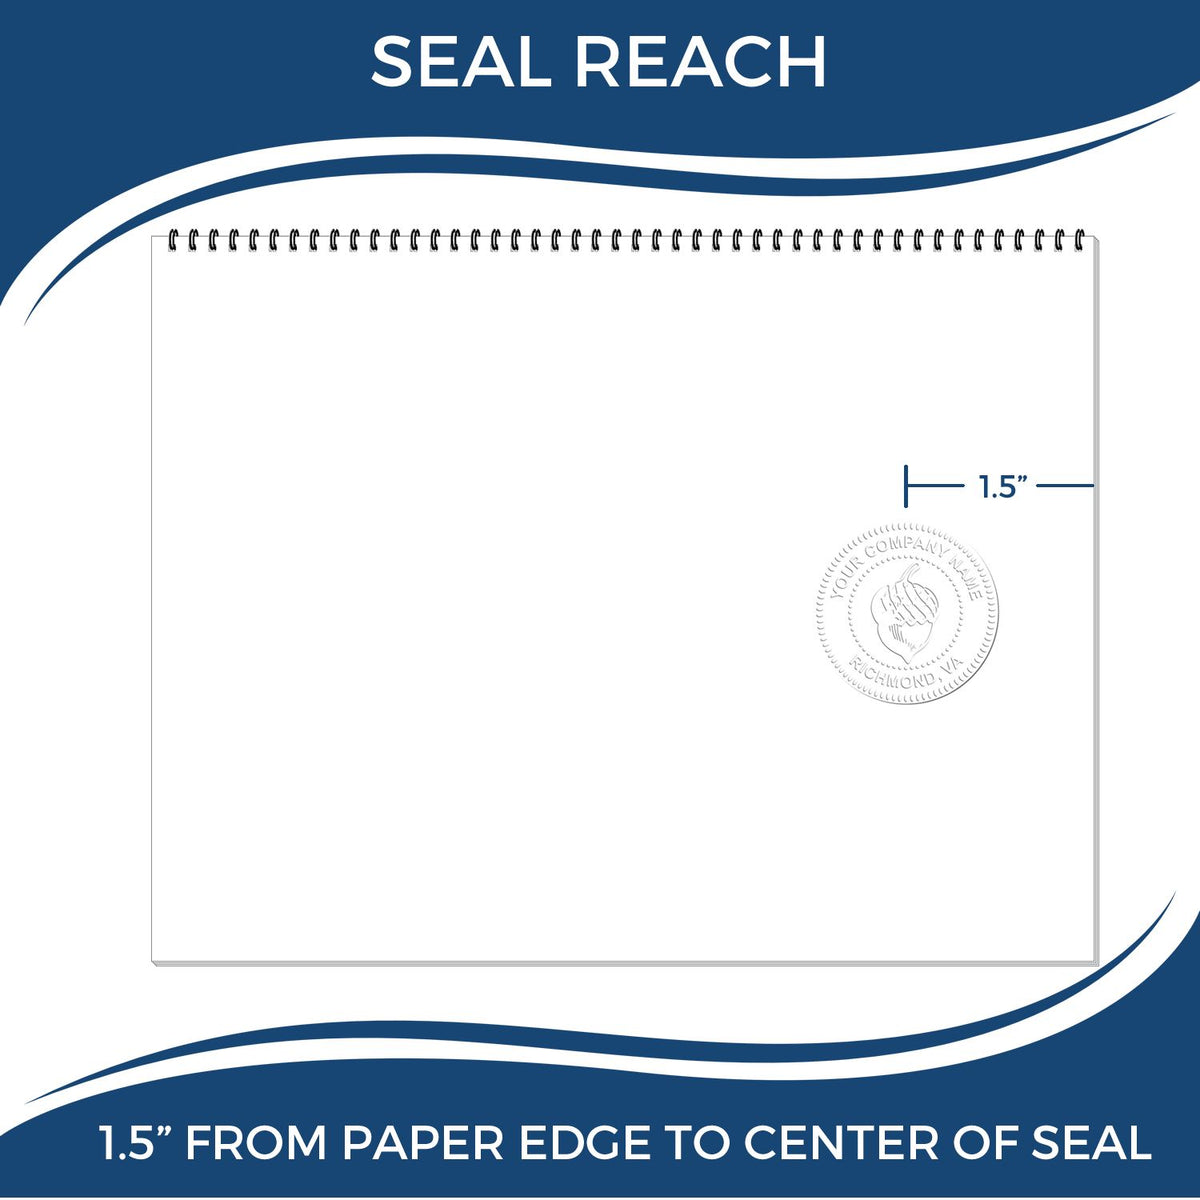 An infographic showing the seal reach which is represented by a ruler and a miniature seal image of the Hybrid North Carolina Land Surveyor Seal